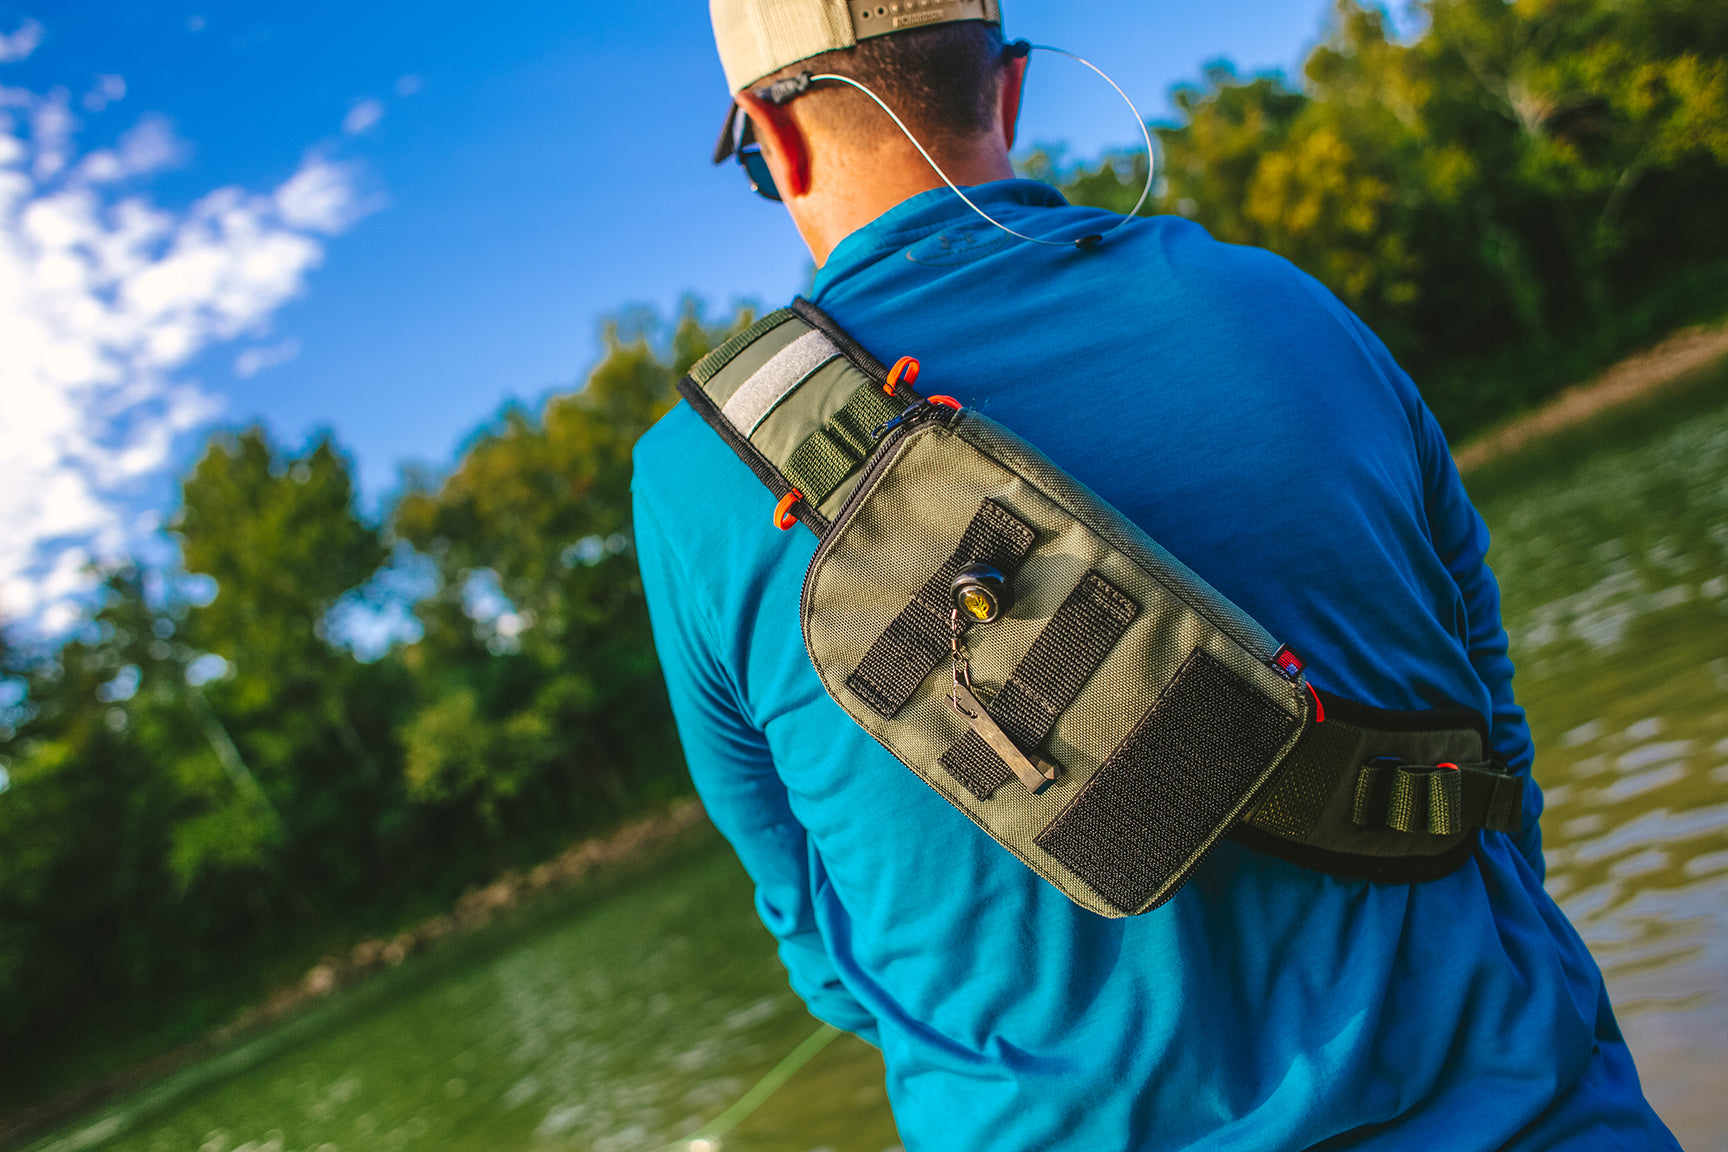 Bare Fishing Co. - Fly Fishing Slings and Packs - Made in the USA